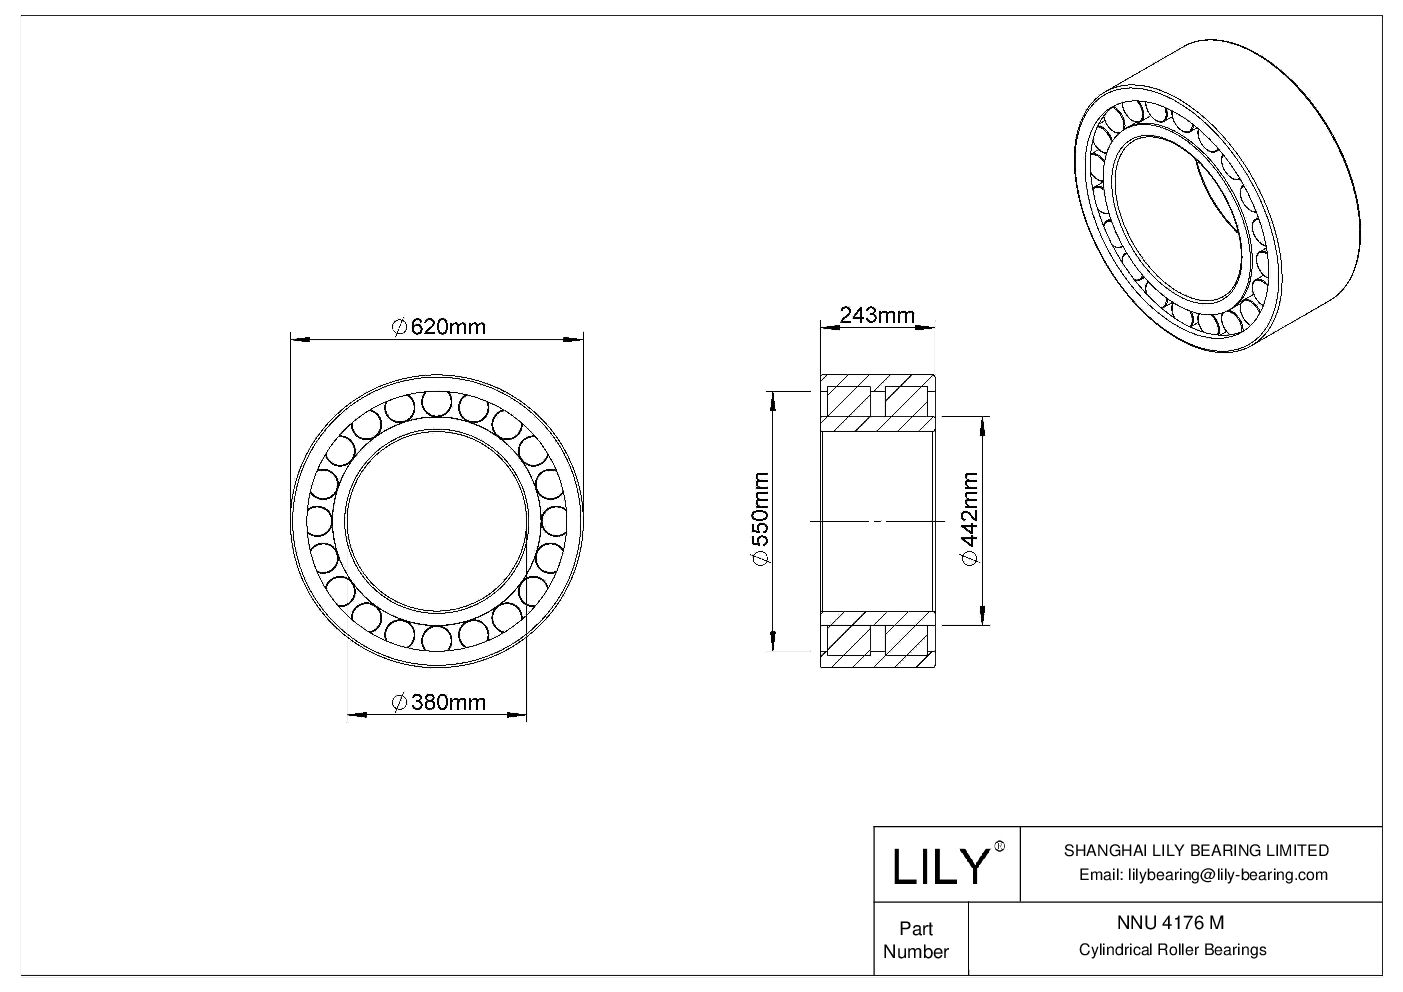 NNU 4176 M Double Row Cylindrical Roller Bearings cad drawing